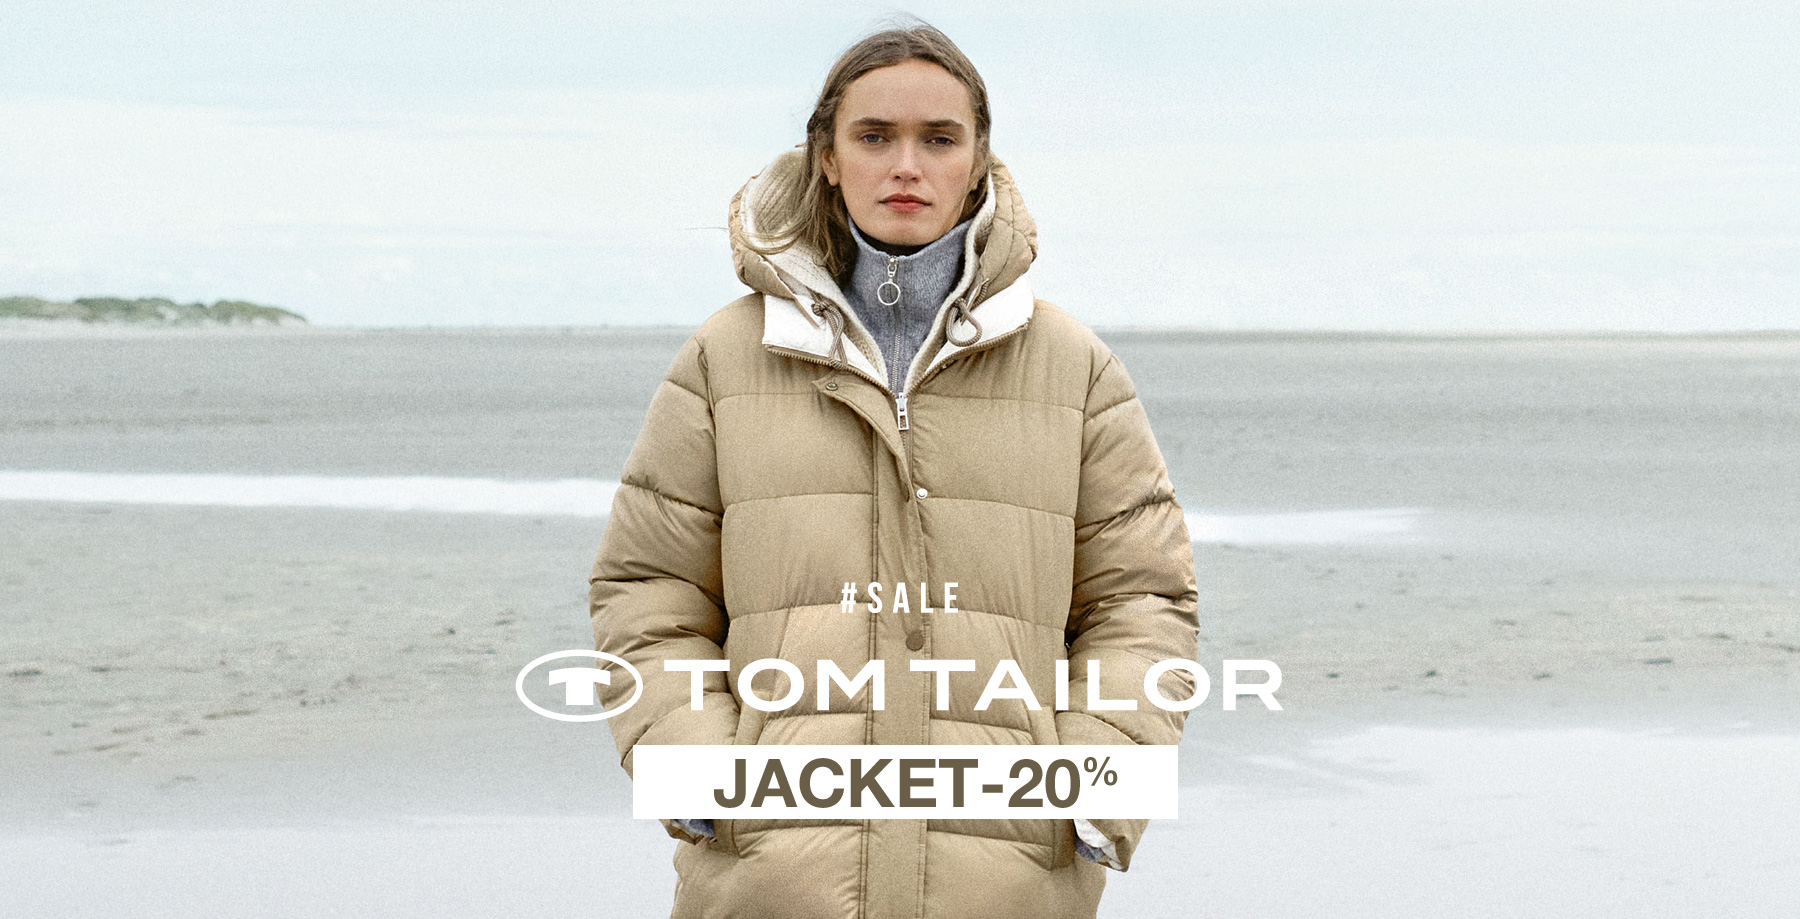 Tom Tailor Jackets -20%